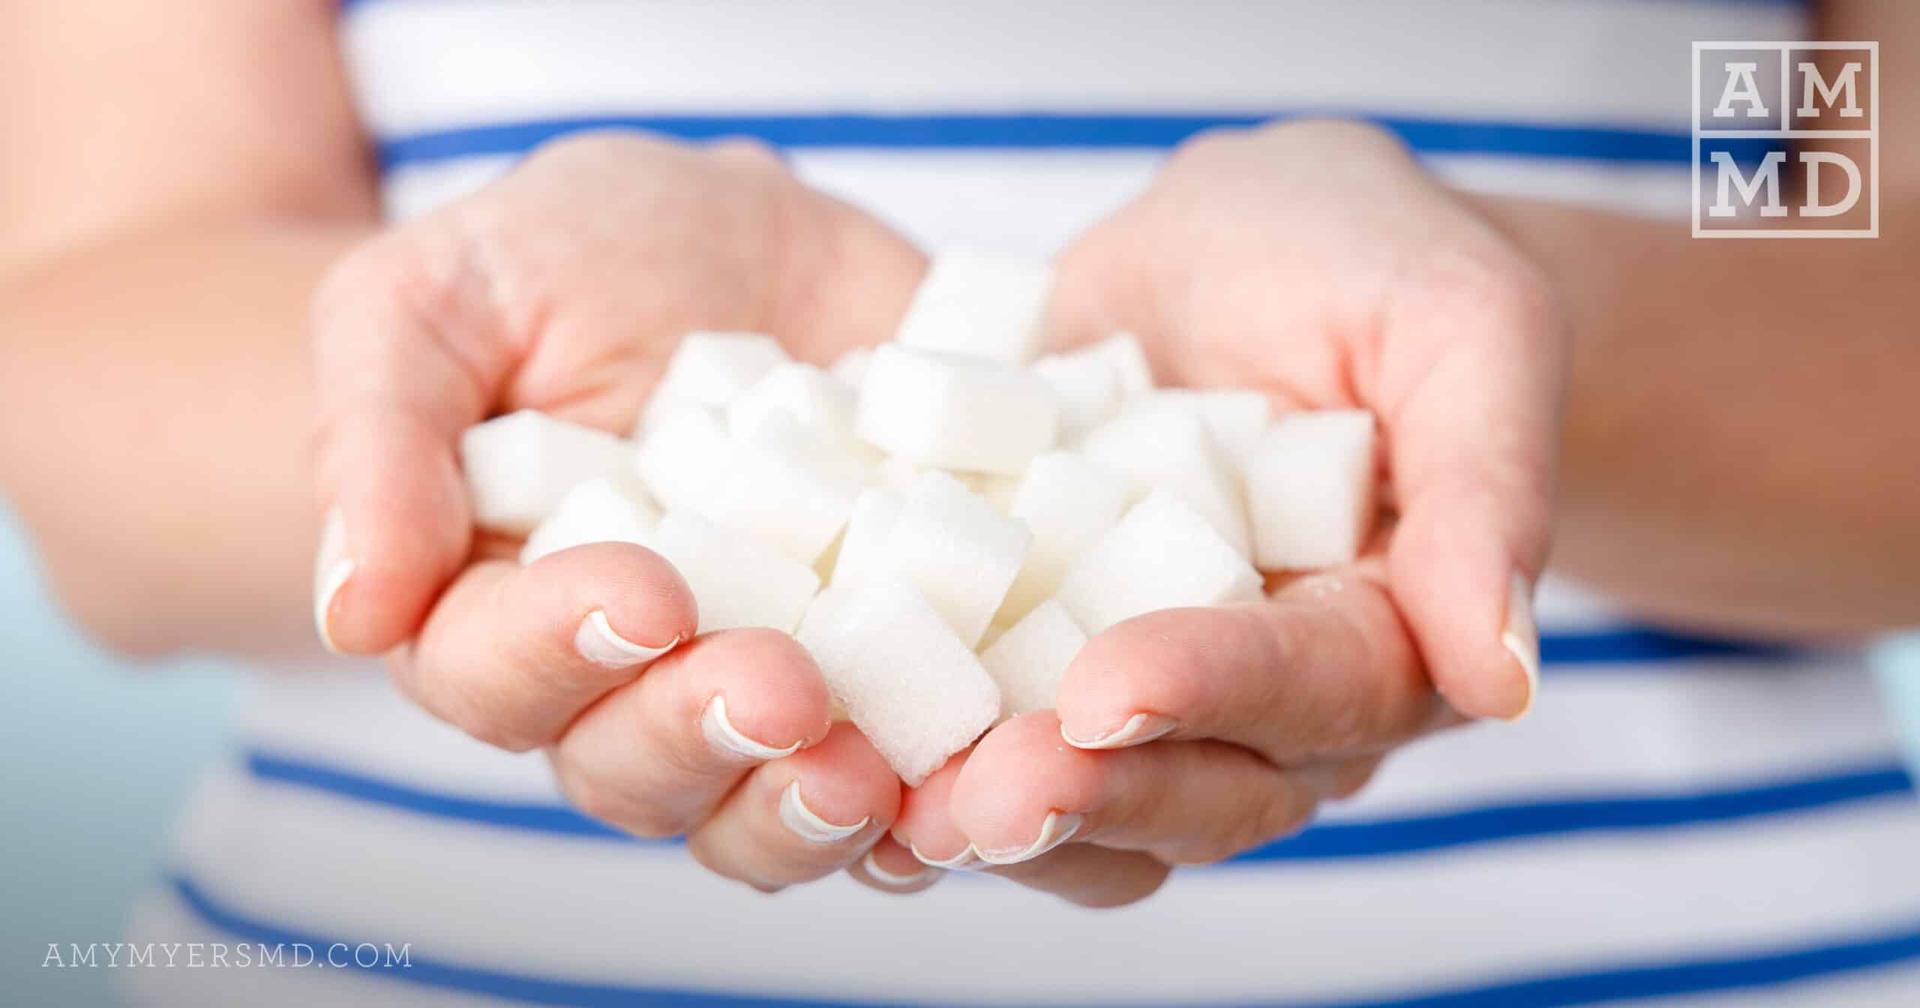 How Does Sugar Contribute to Leaky Gut